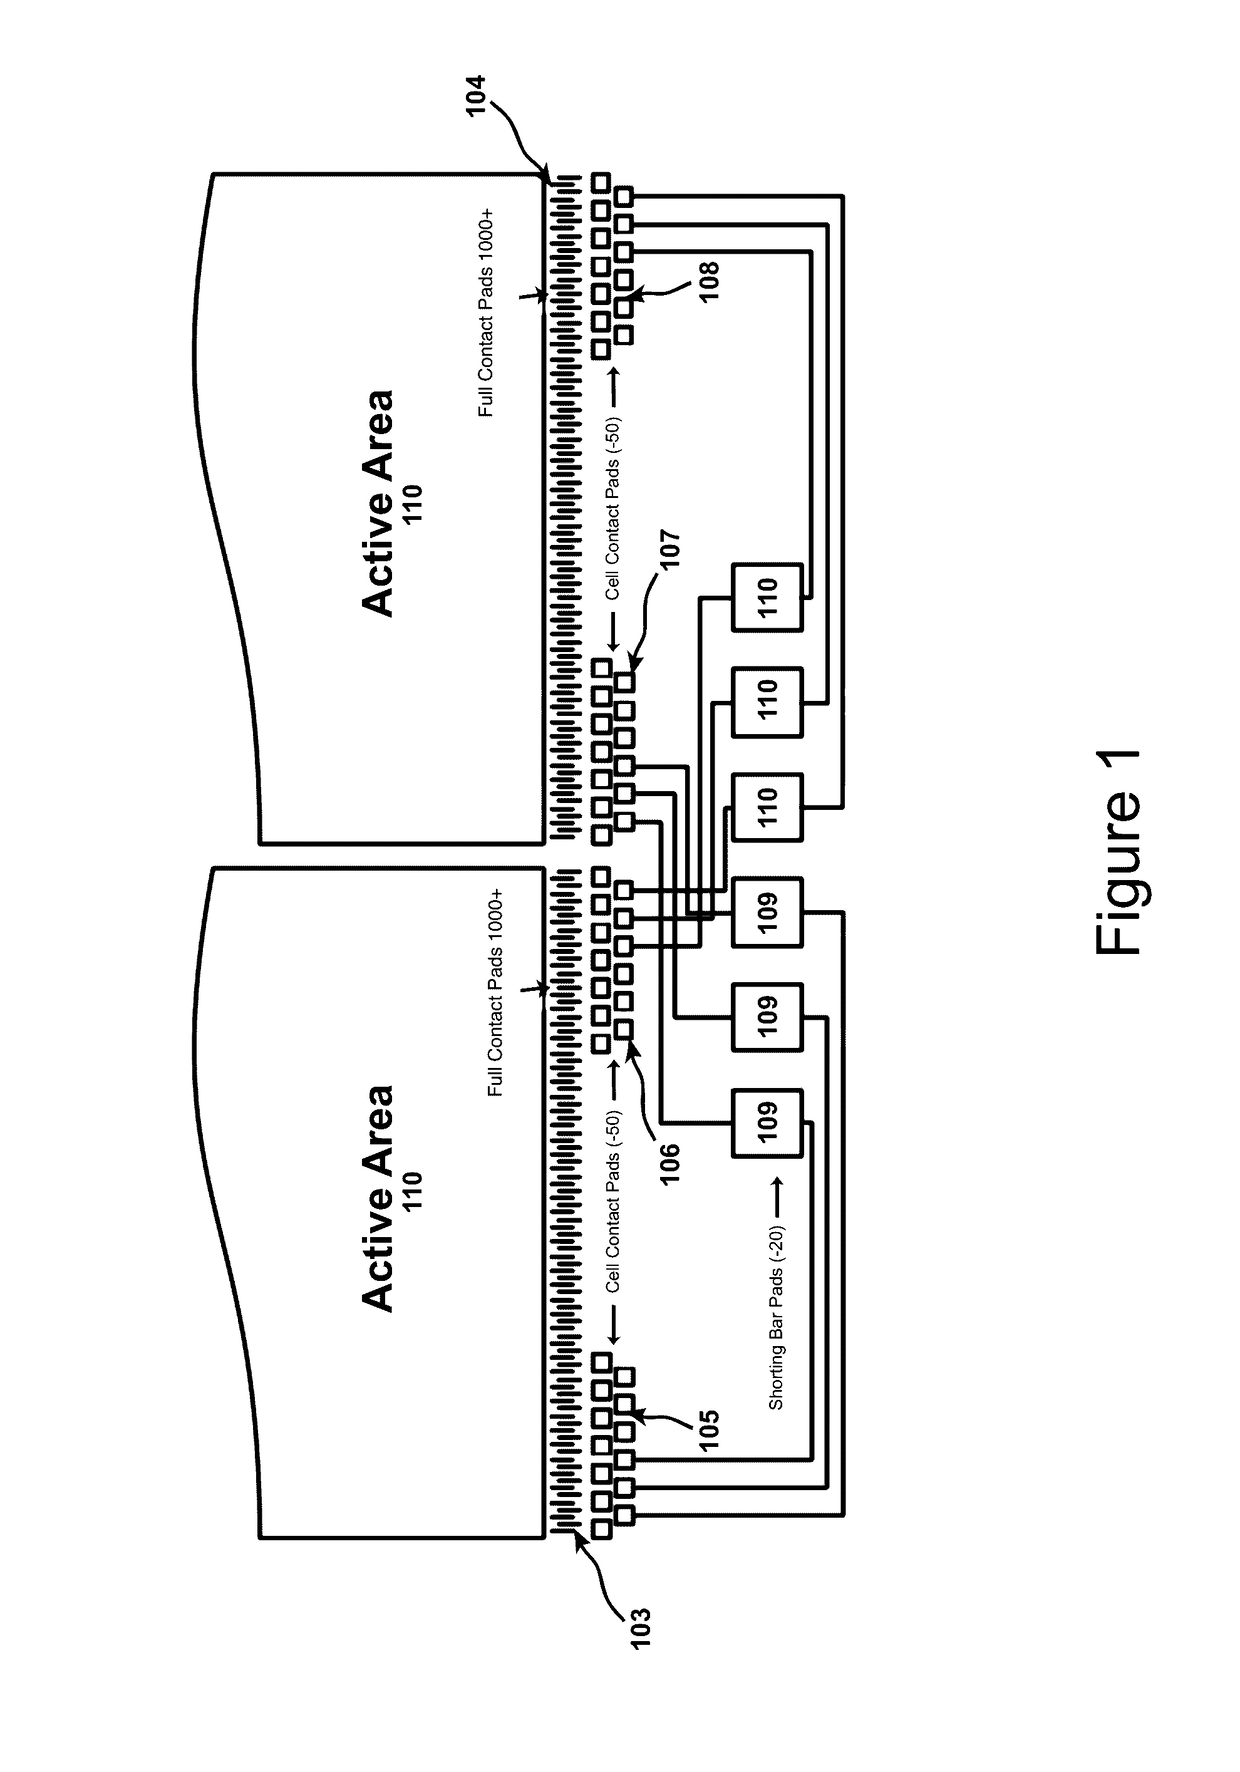 Systems and methods for electrical inspection of flat panel displays using cell contact probing pads